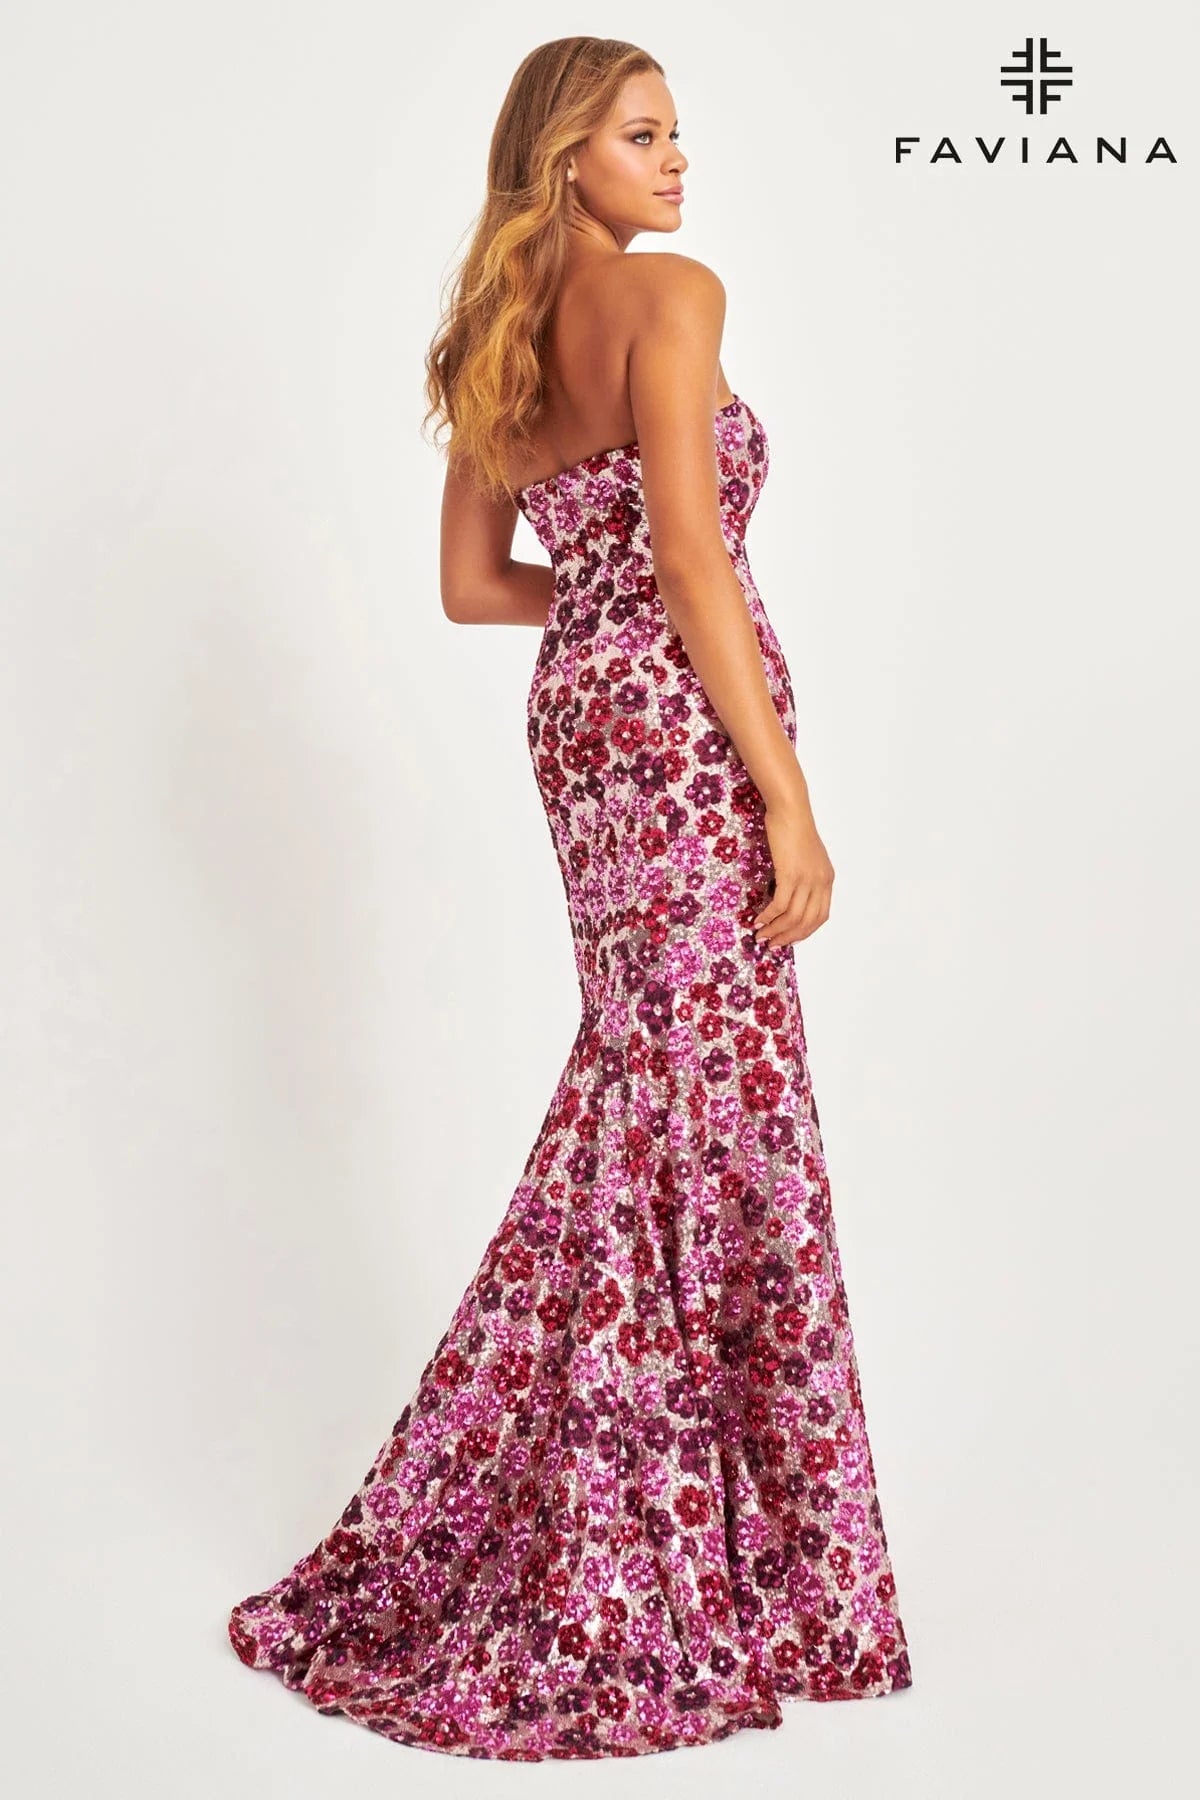 Pink/Silver Strapless Sequin Mermaid Dress With Colorful Floral Design | 11036